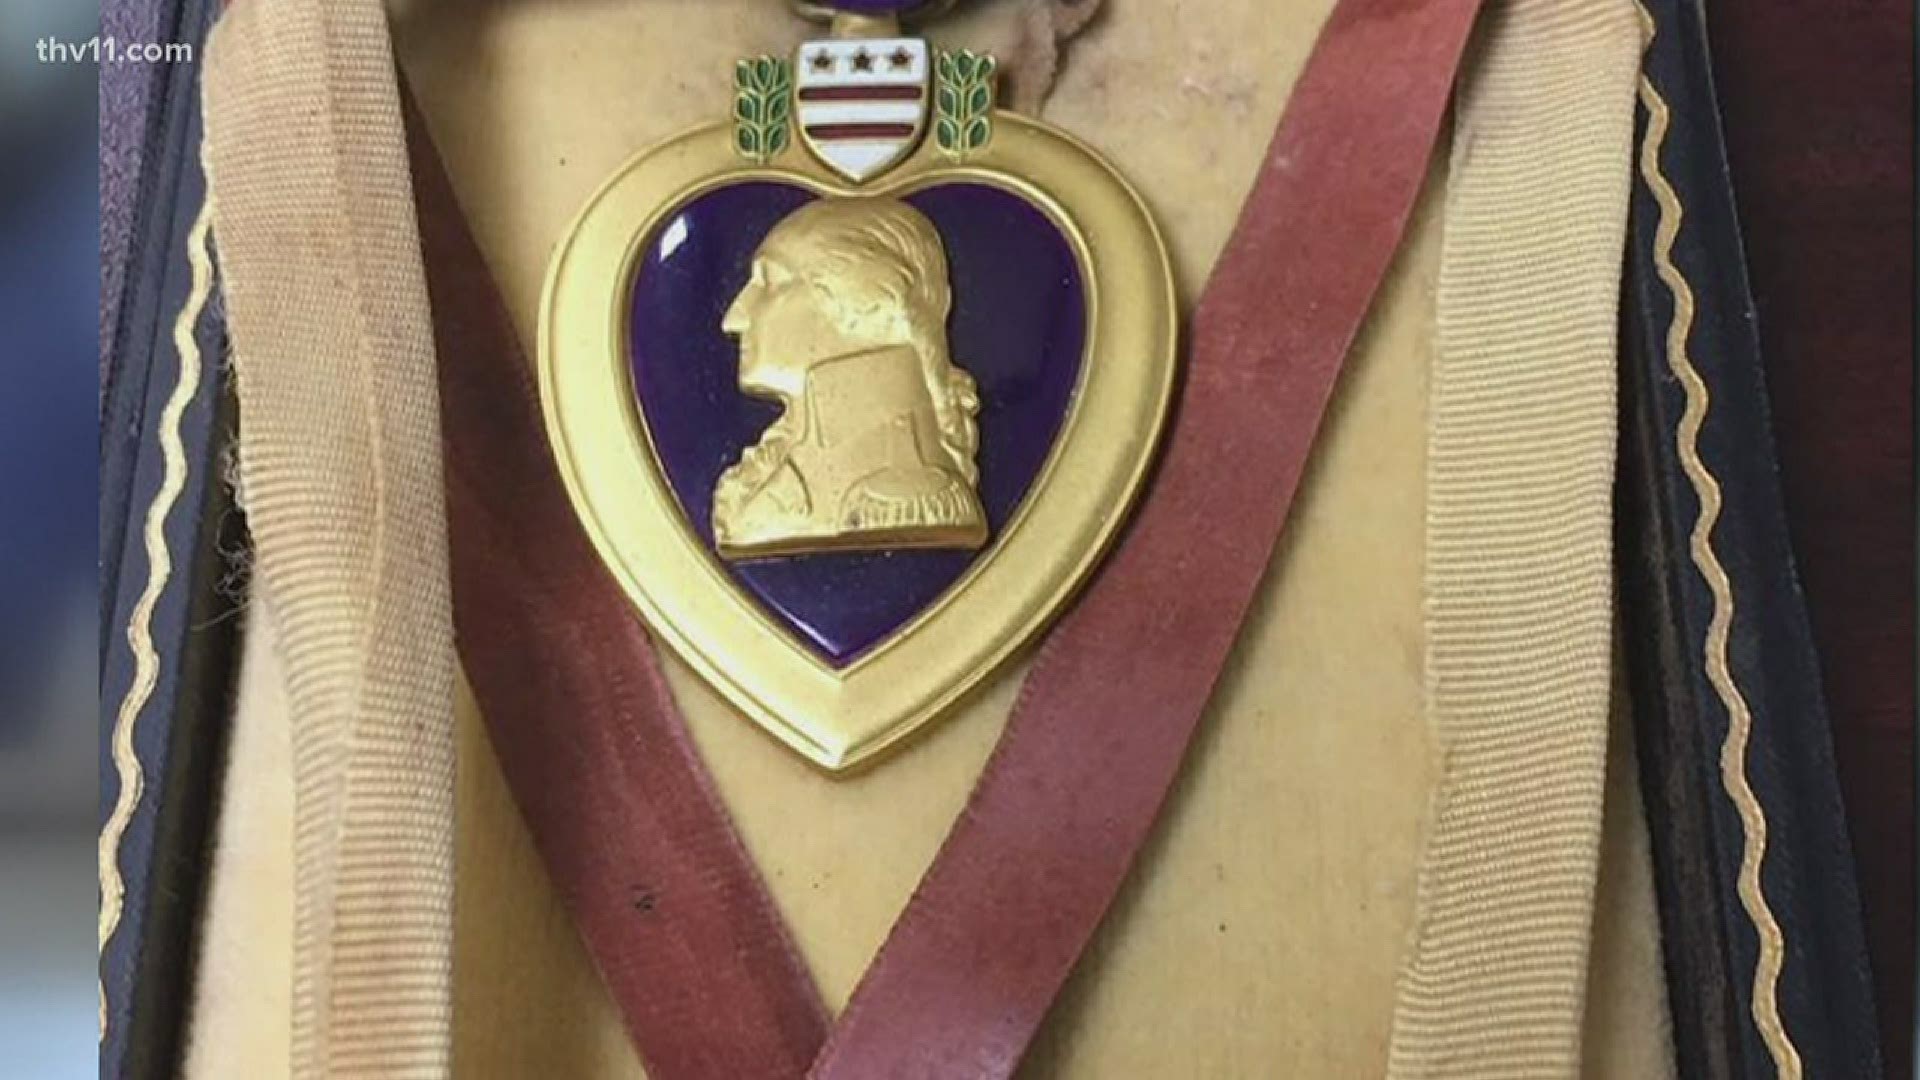 The Purple Heart of Private First Class Henry Ferguson was donated to a Goodwill in Arkansas "by mistake" but the family is working to get it back home.